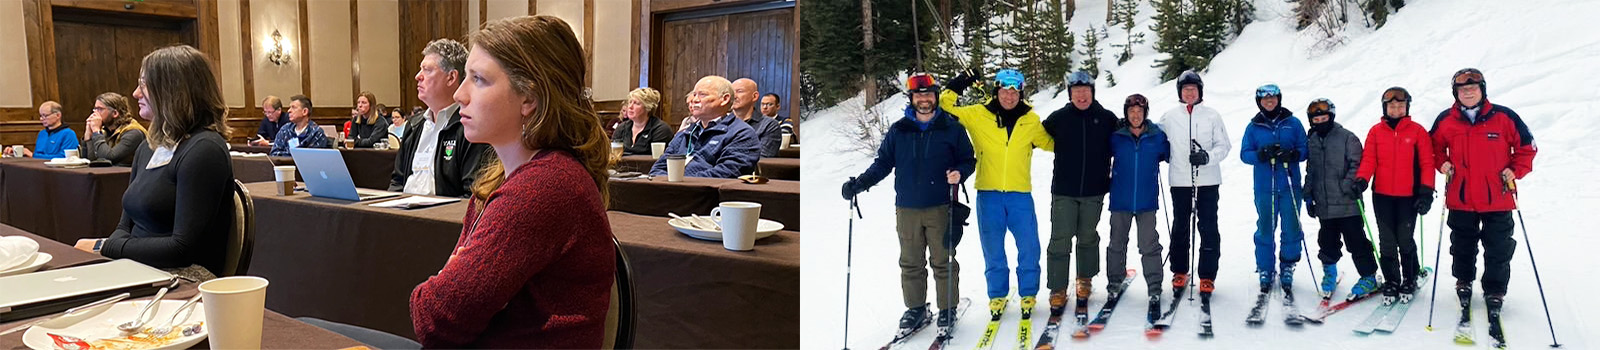 Two photos: on left, attendees at desks listening to a speaker; on right, several attendees in ski gear on snowy slope